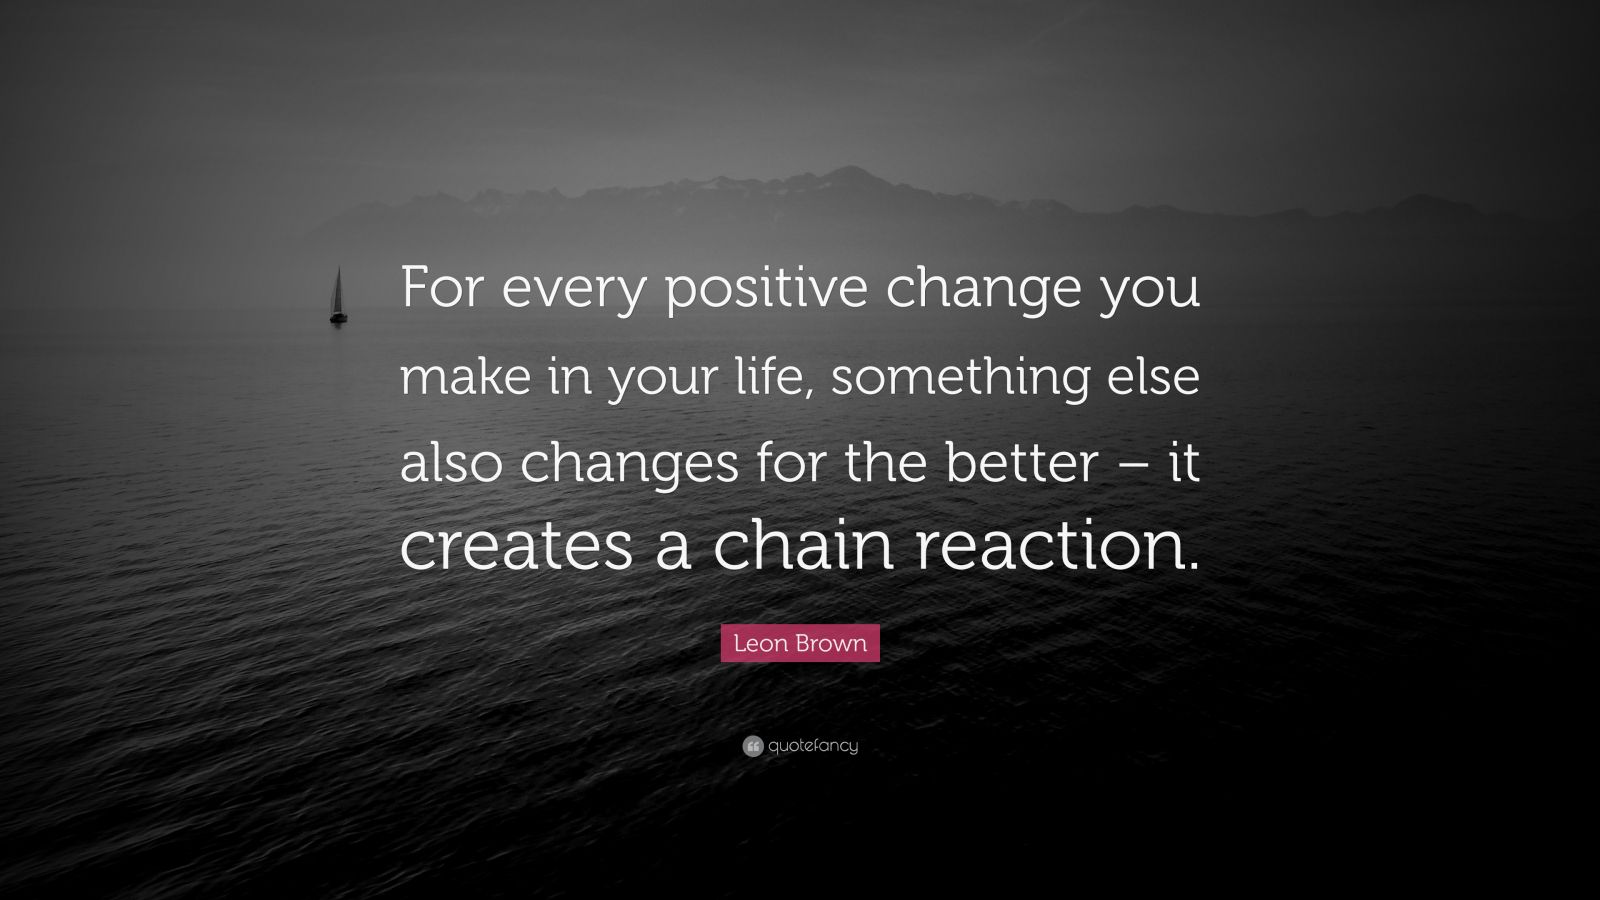 Leon Brown Quote: “For every positive change you make in your life ...